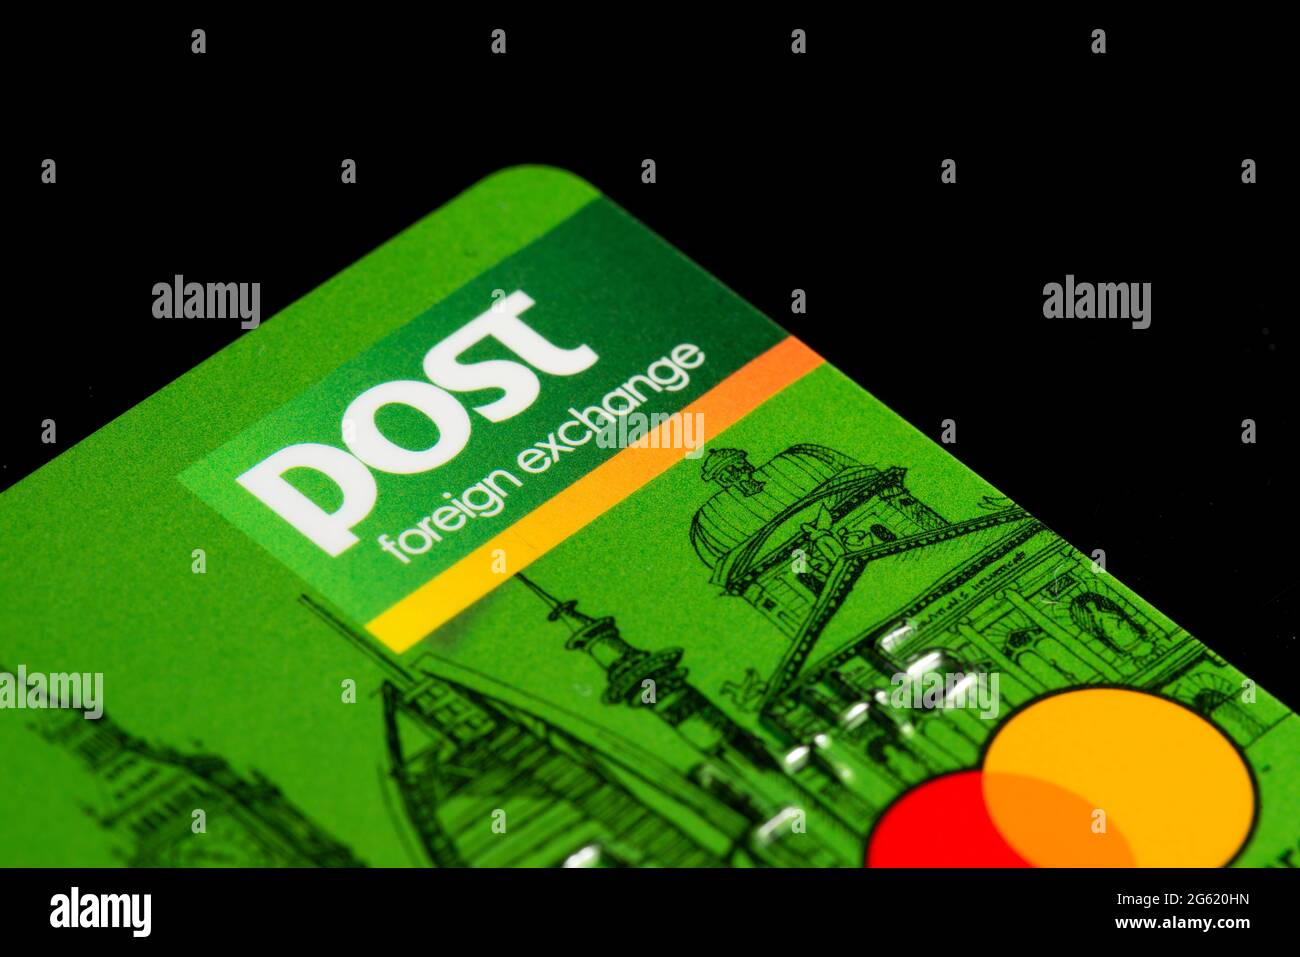 A prepaid multi currency PostFX card issued by An Post or the Irish Post in Ireland Stock Photo